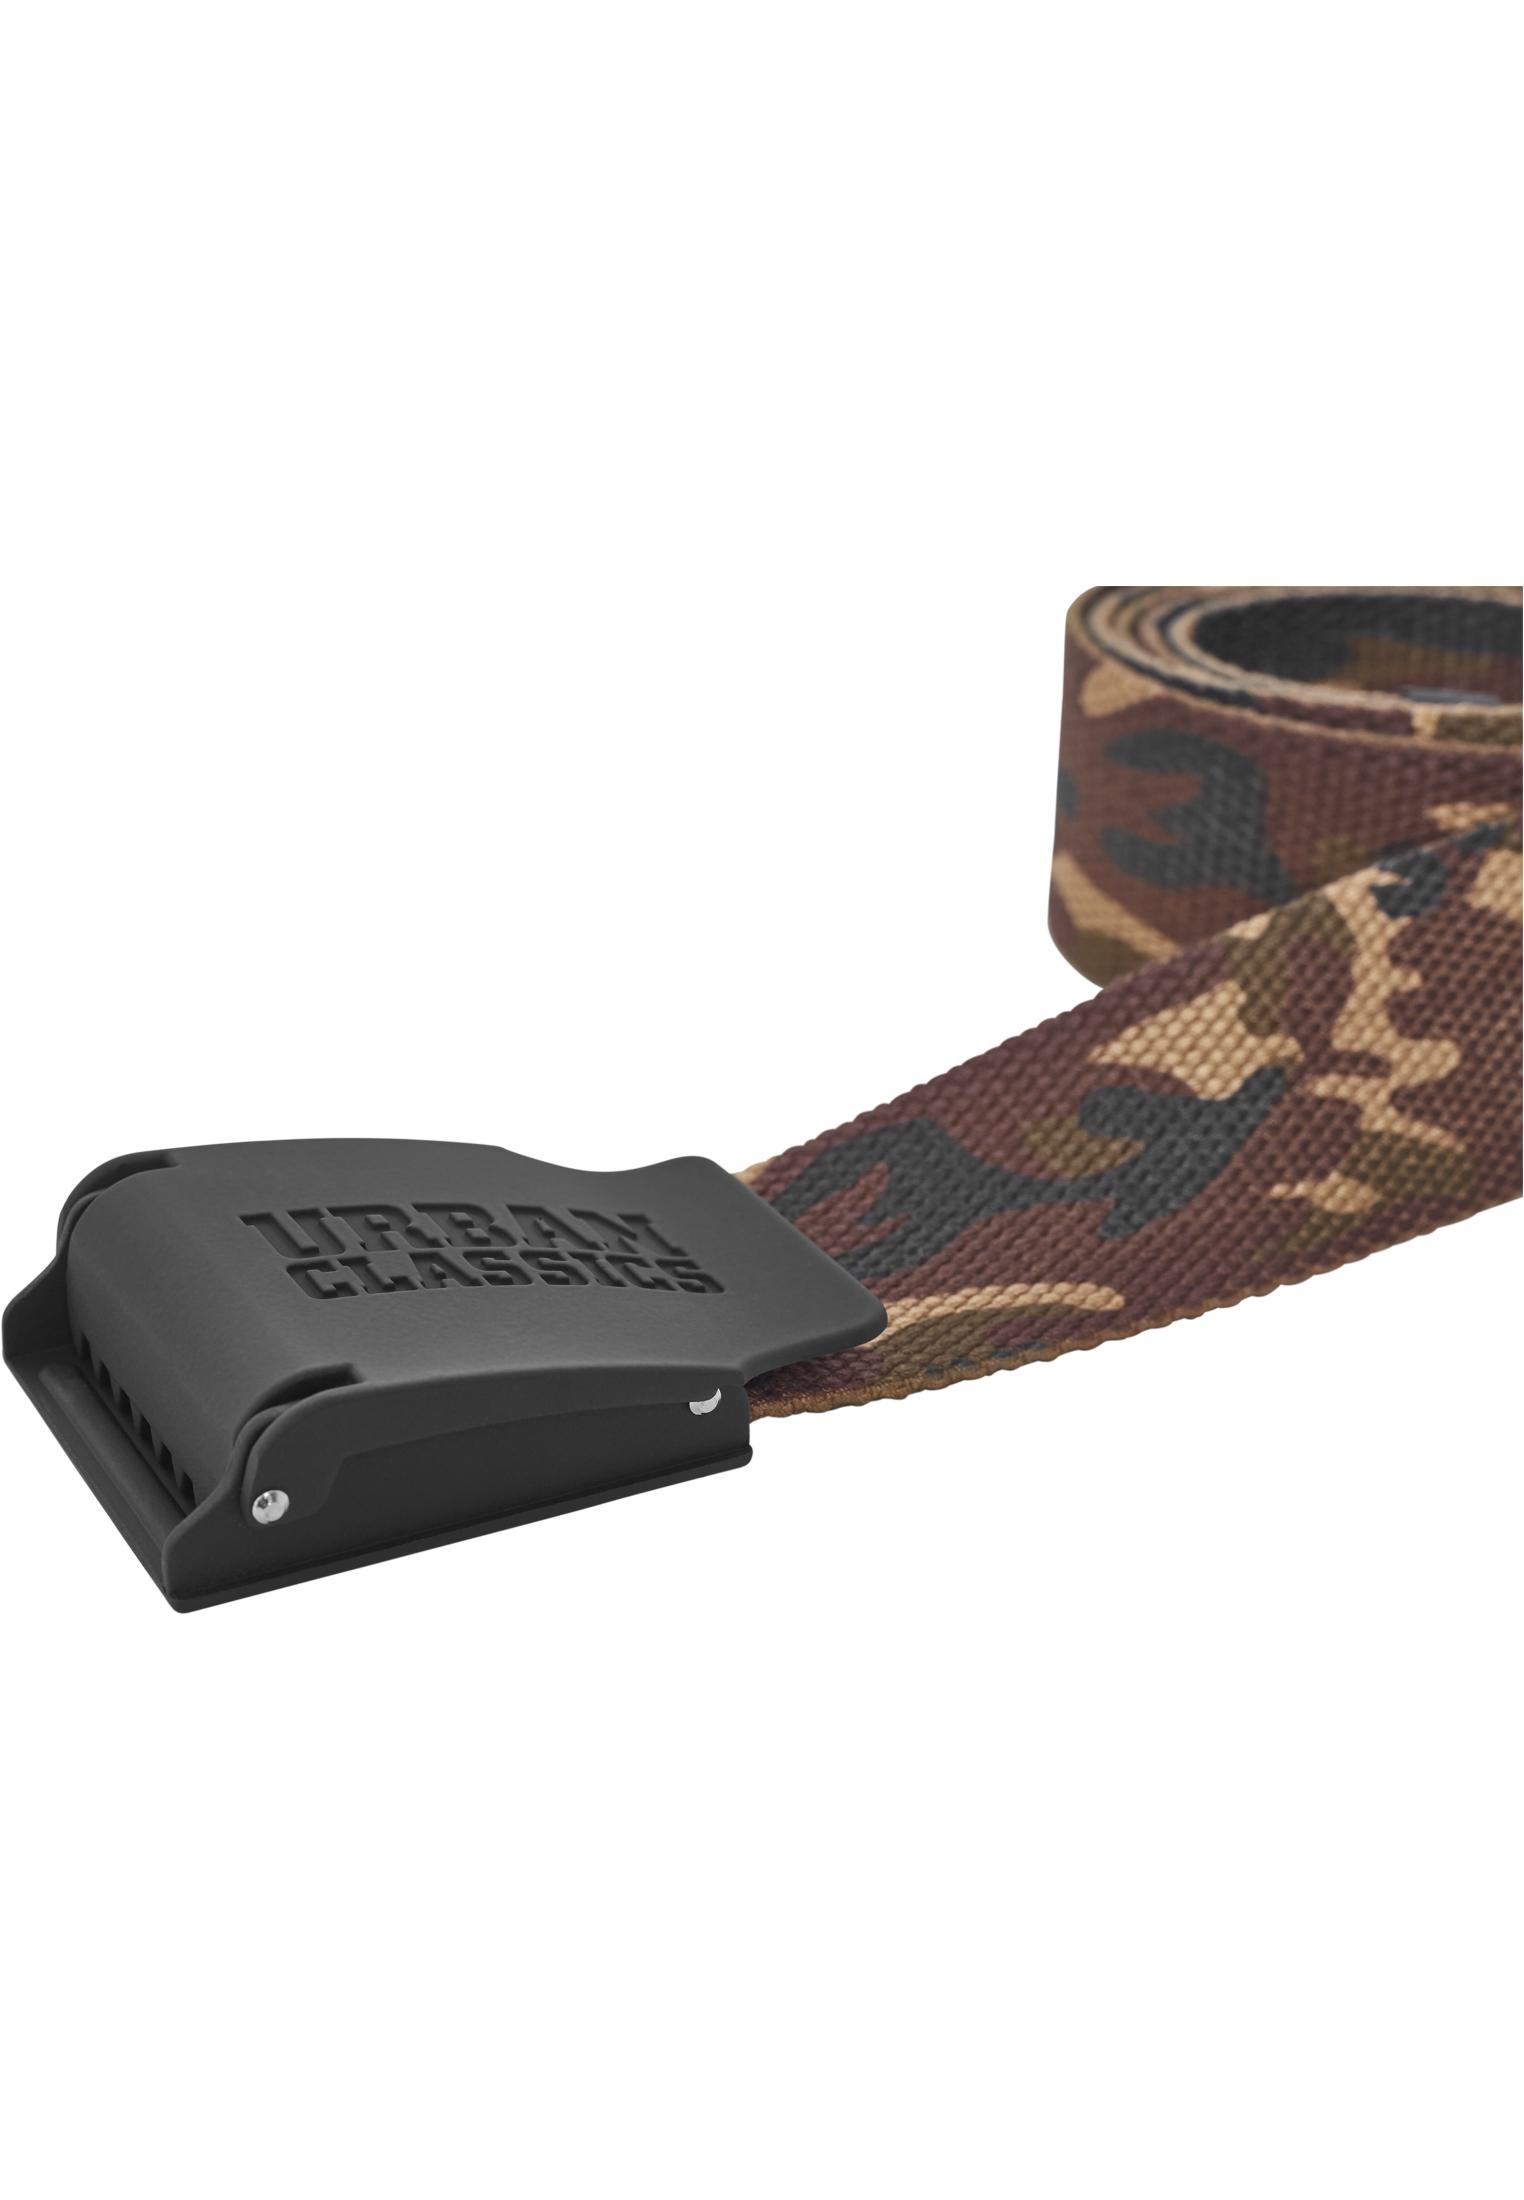 Urban Classics Accessoires Woven Belt Rubbered Touch UC (Farbe: wood camo / Größe: 120cm)